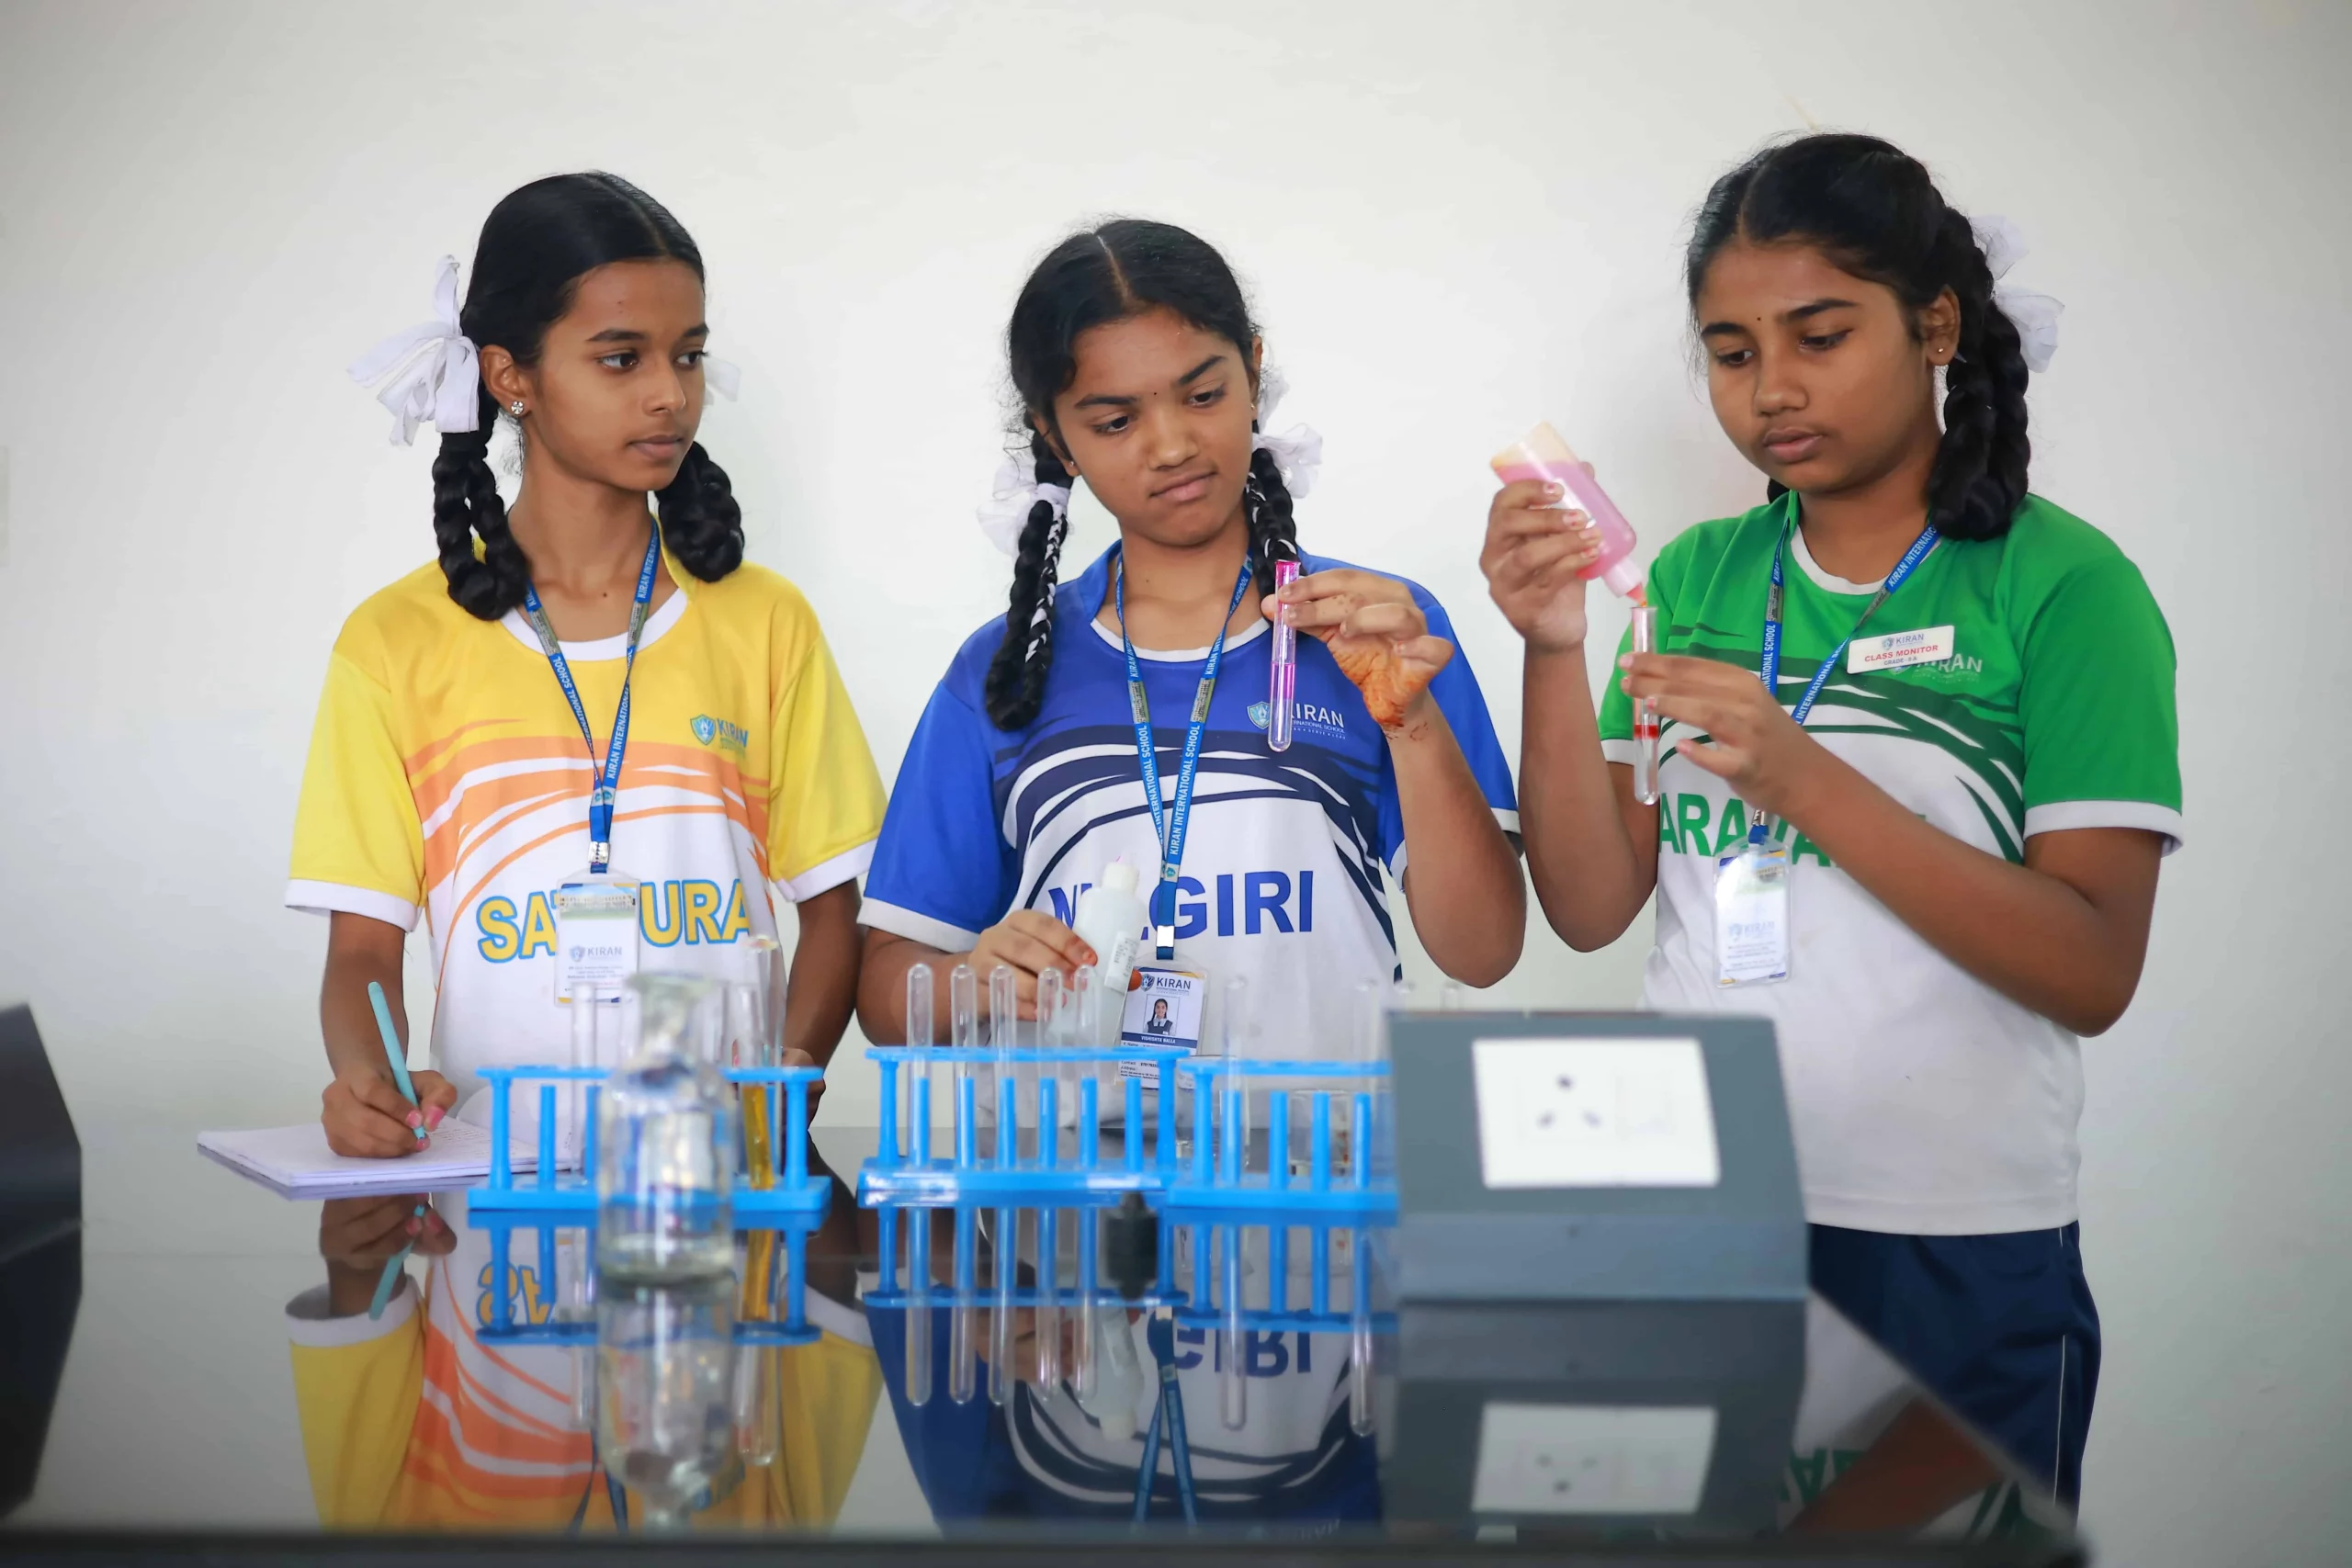 Students engaged in a hands-on science practical, conducting experiments with laboratory equipment, fostering a dynamic and experiential learning environment.